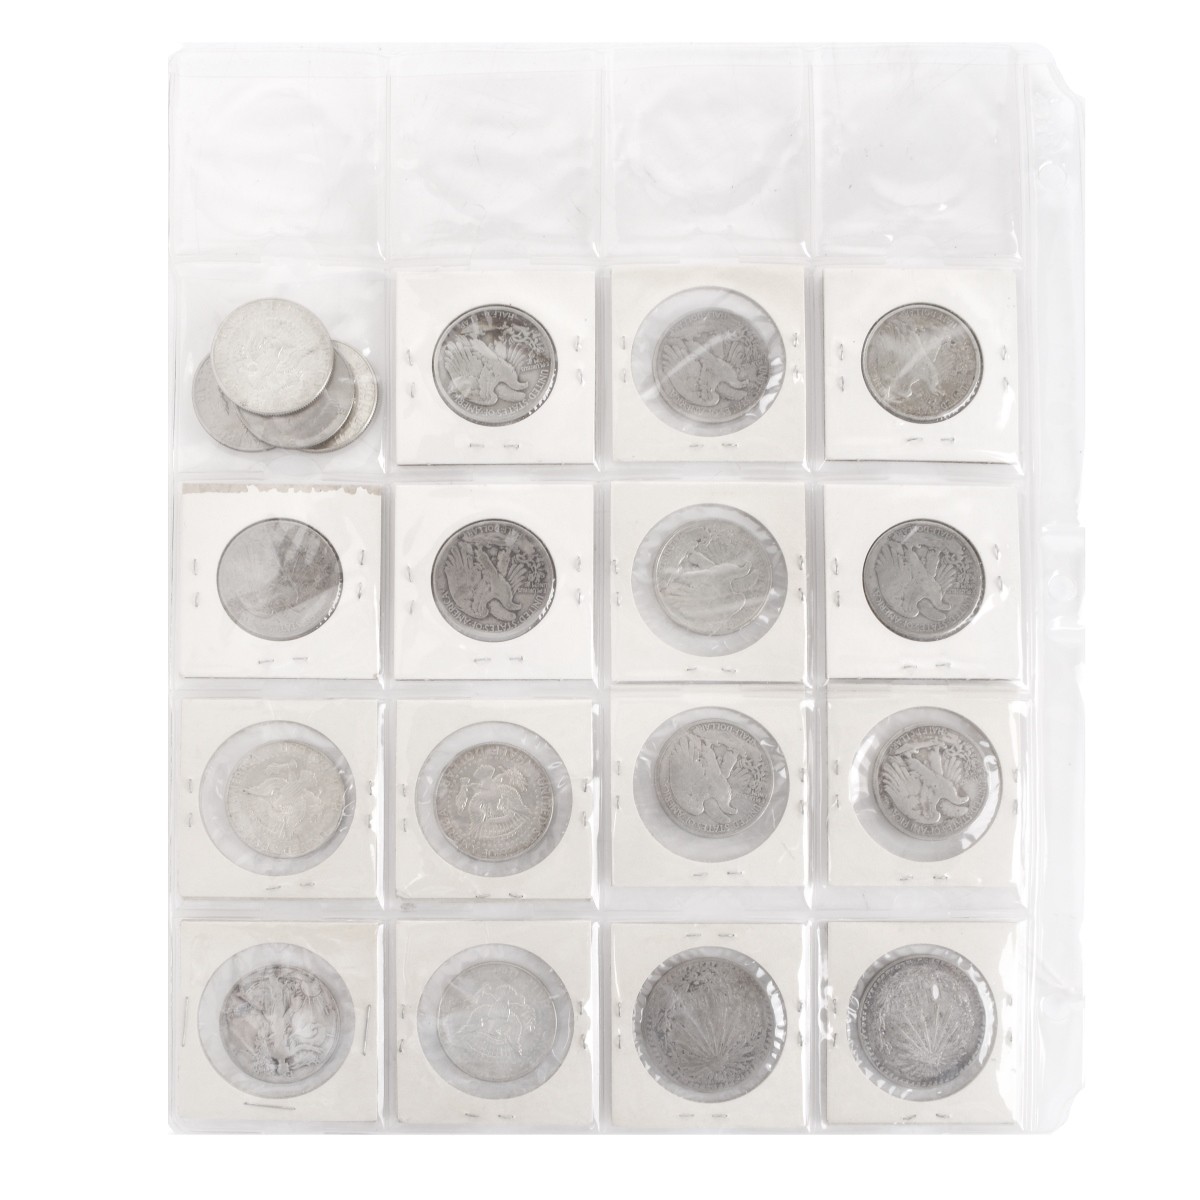 Nineteen (19) Assorted Silver Coins